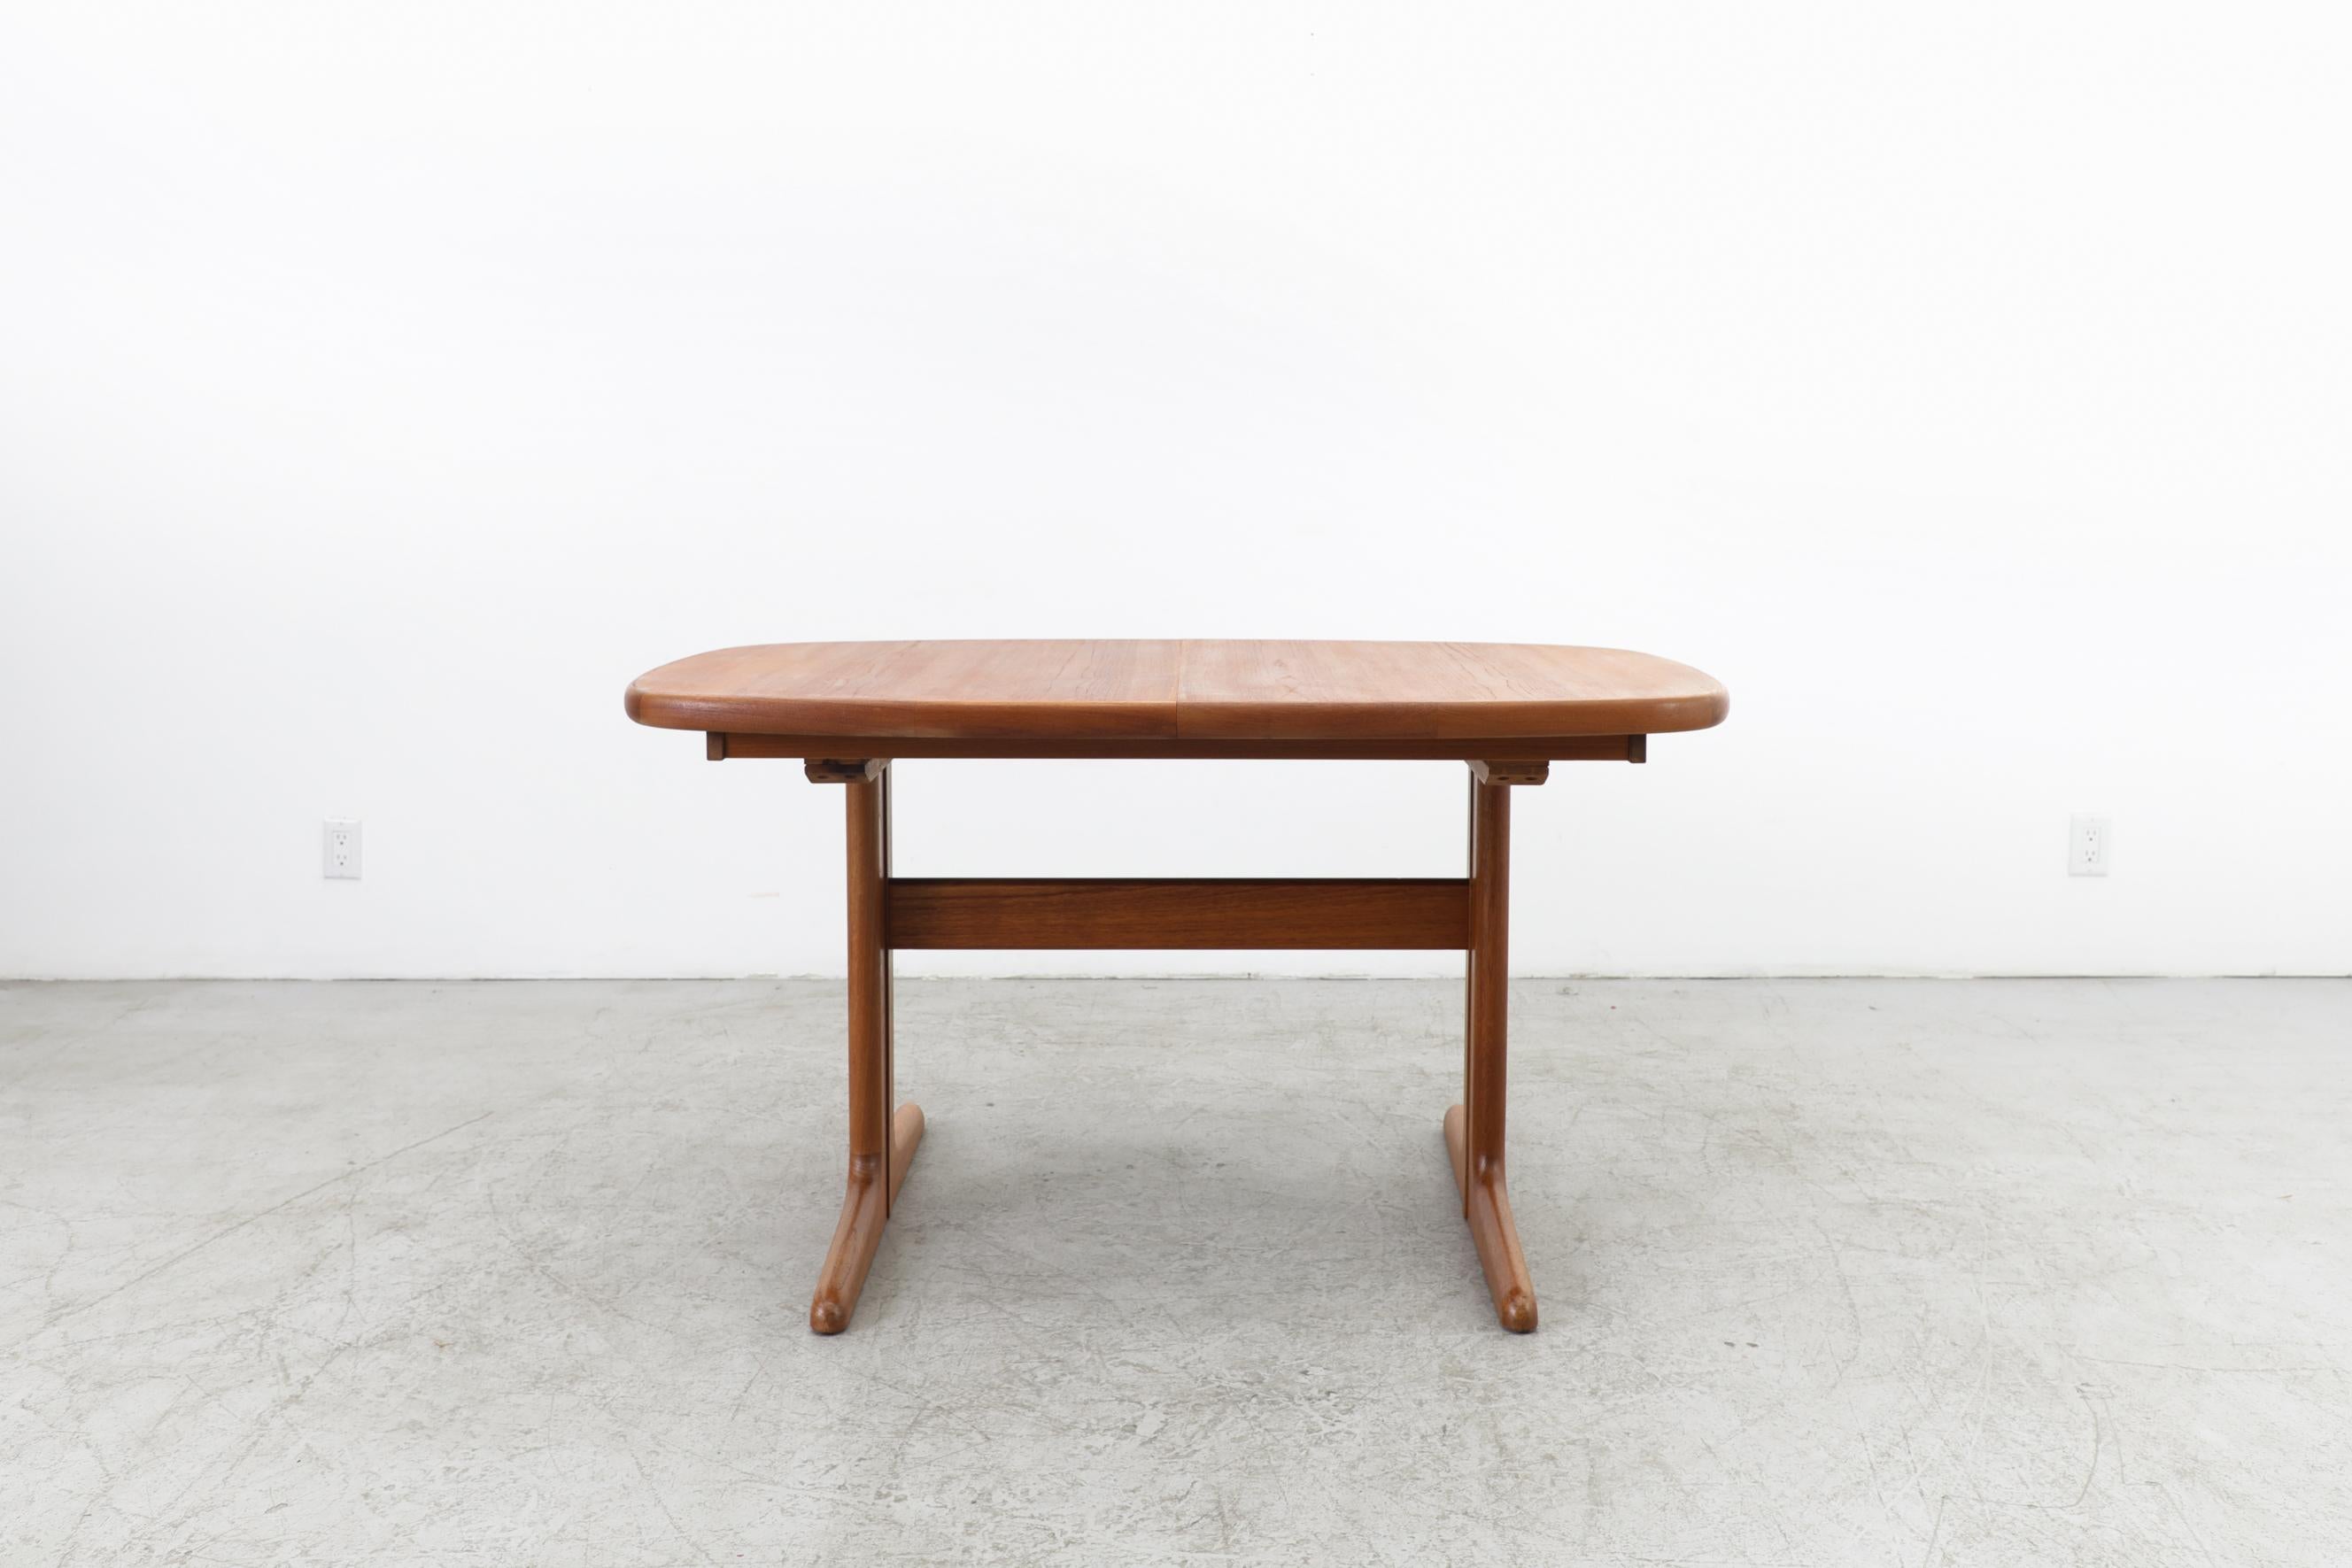 Mid-century 1970's Danish teak dining table with 2 leaves by Skovby Møbelfabrik. It is a 70's Danish oval-ish teak dining table with double T-shaped legs that has 2 leaves that measures 19.625